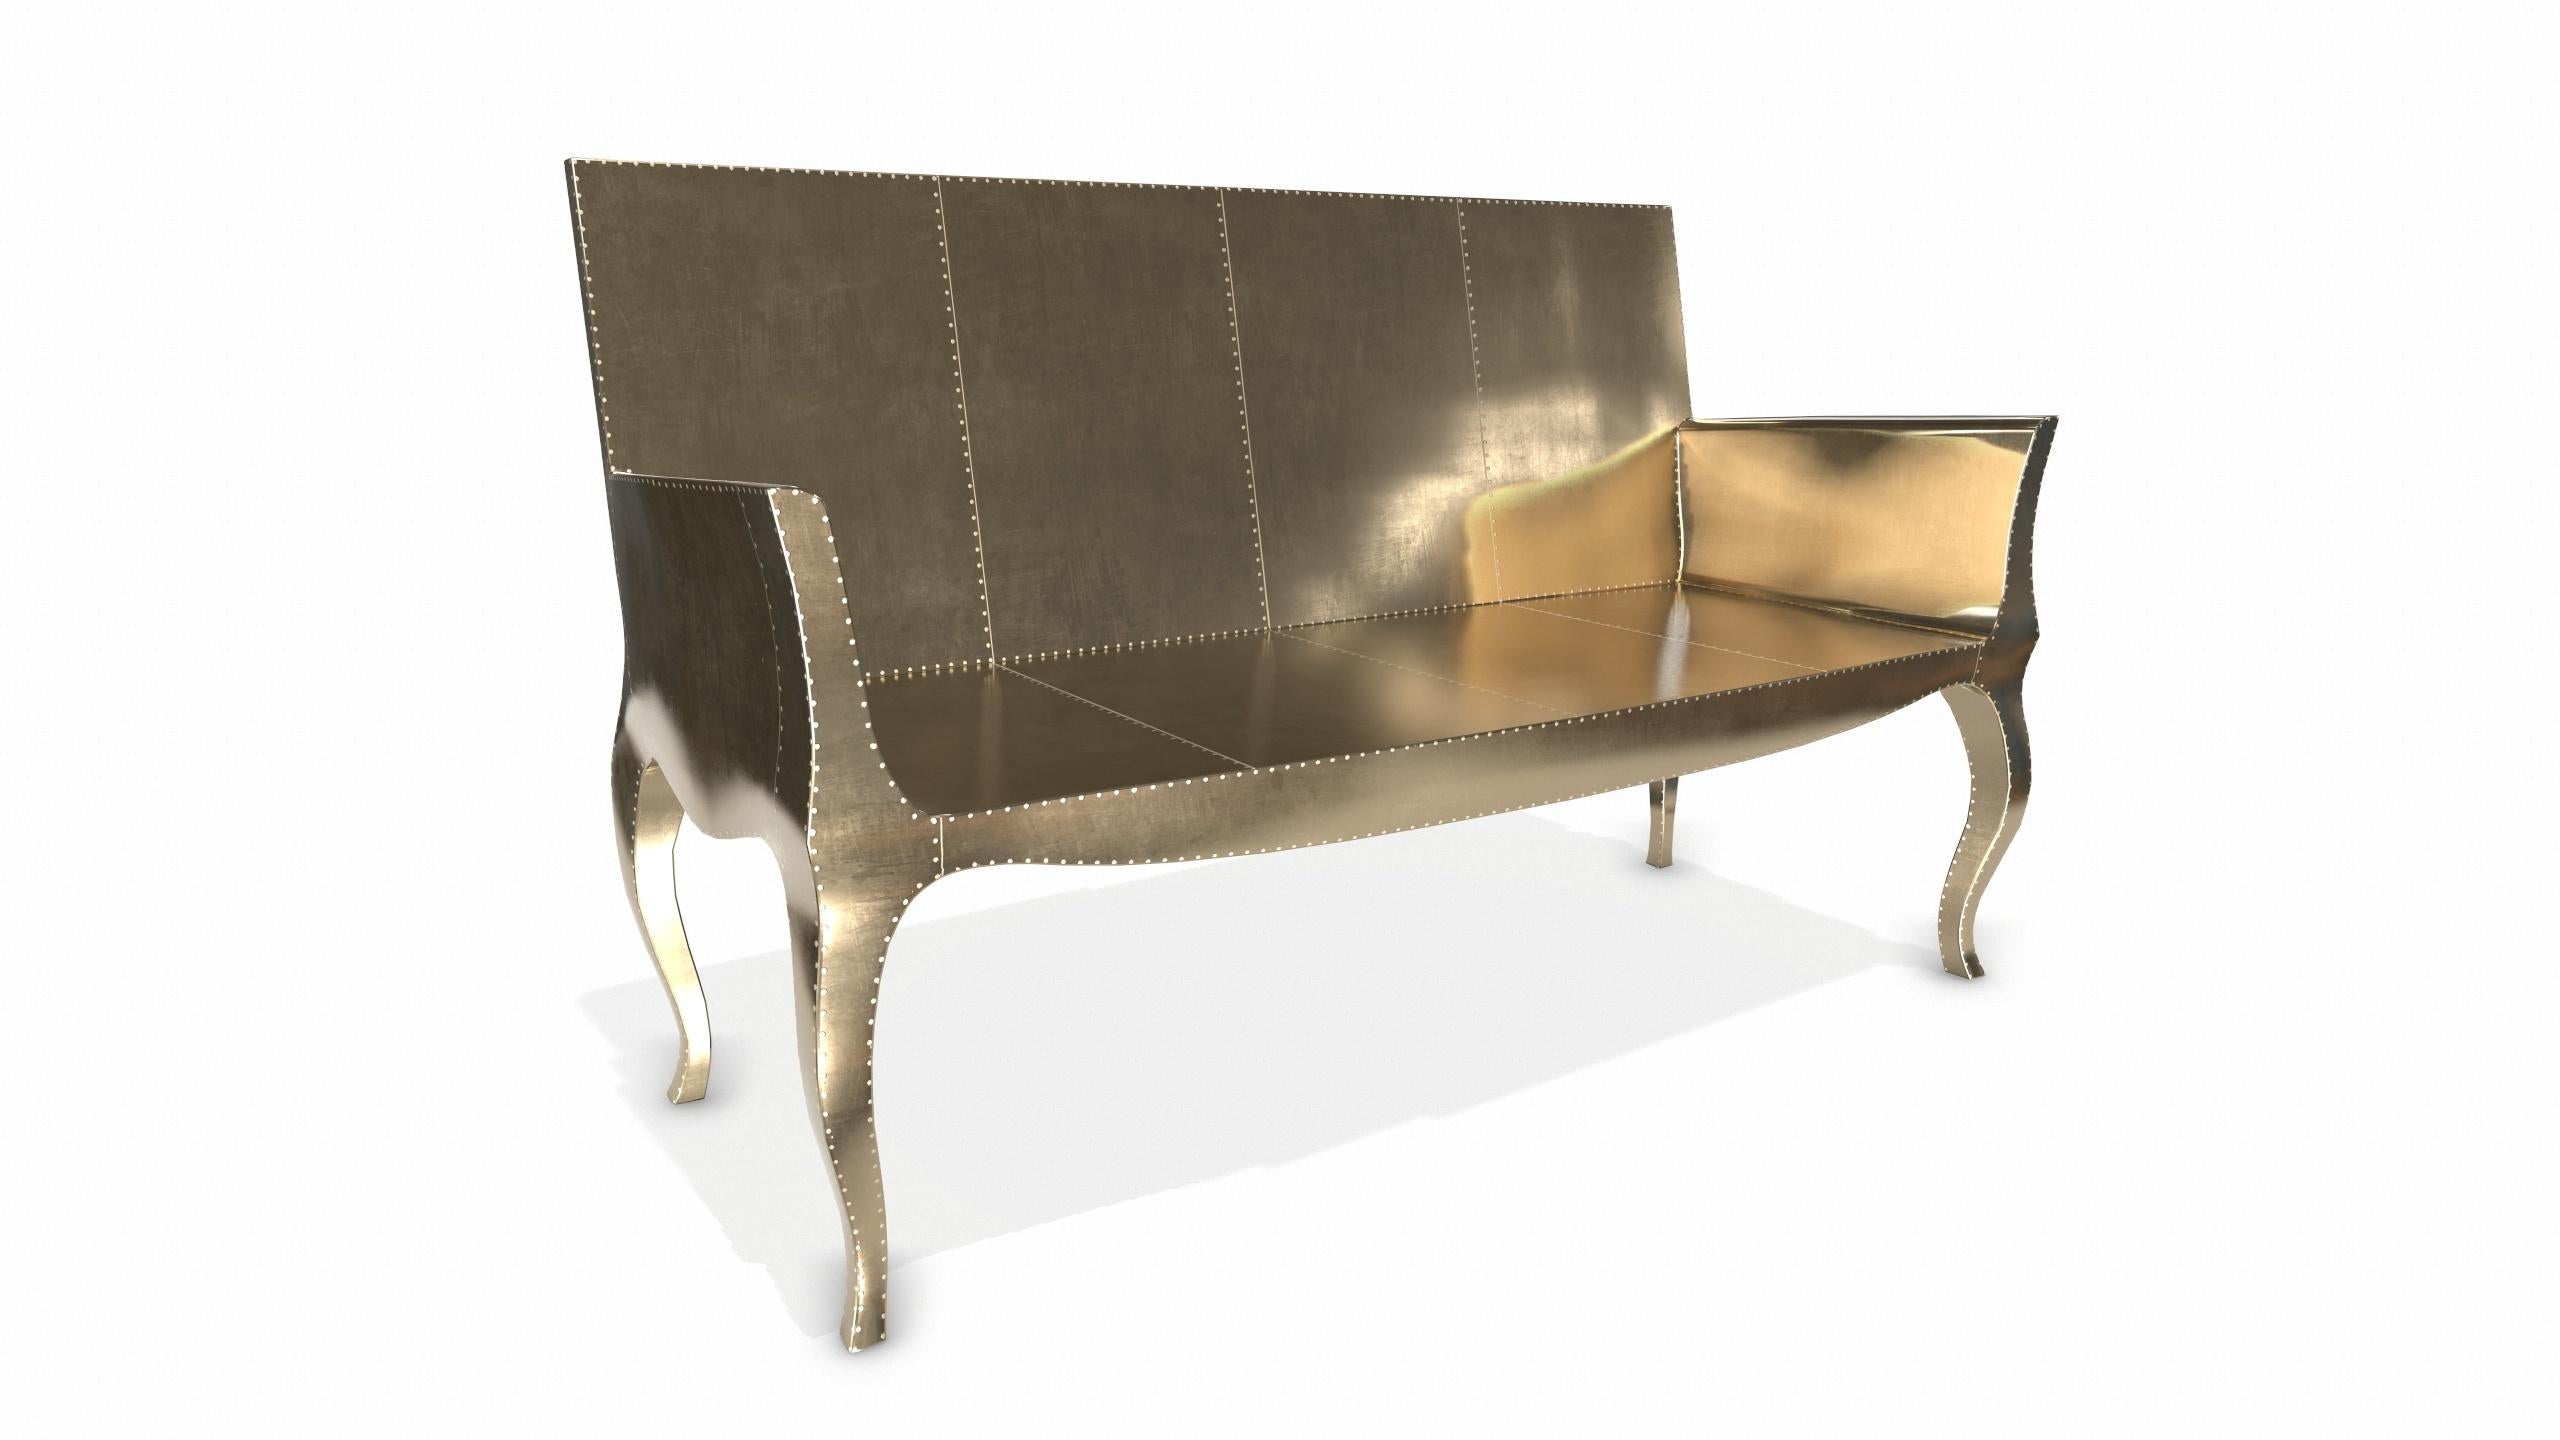 Contemporary Louise Settee Art Deco Loveseats in Smooth Brass by Paul Mathieu For Sale